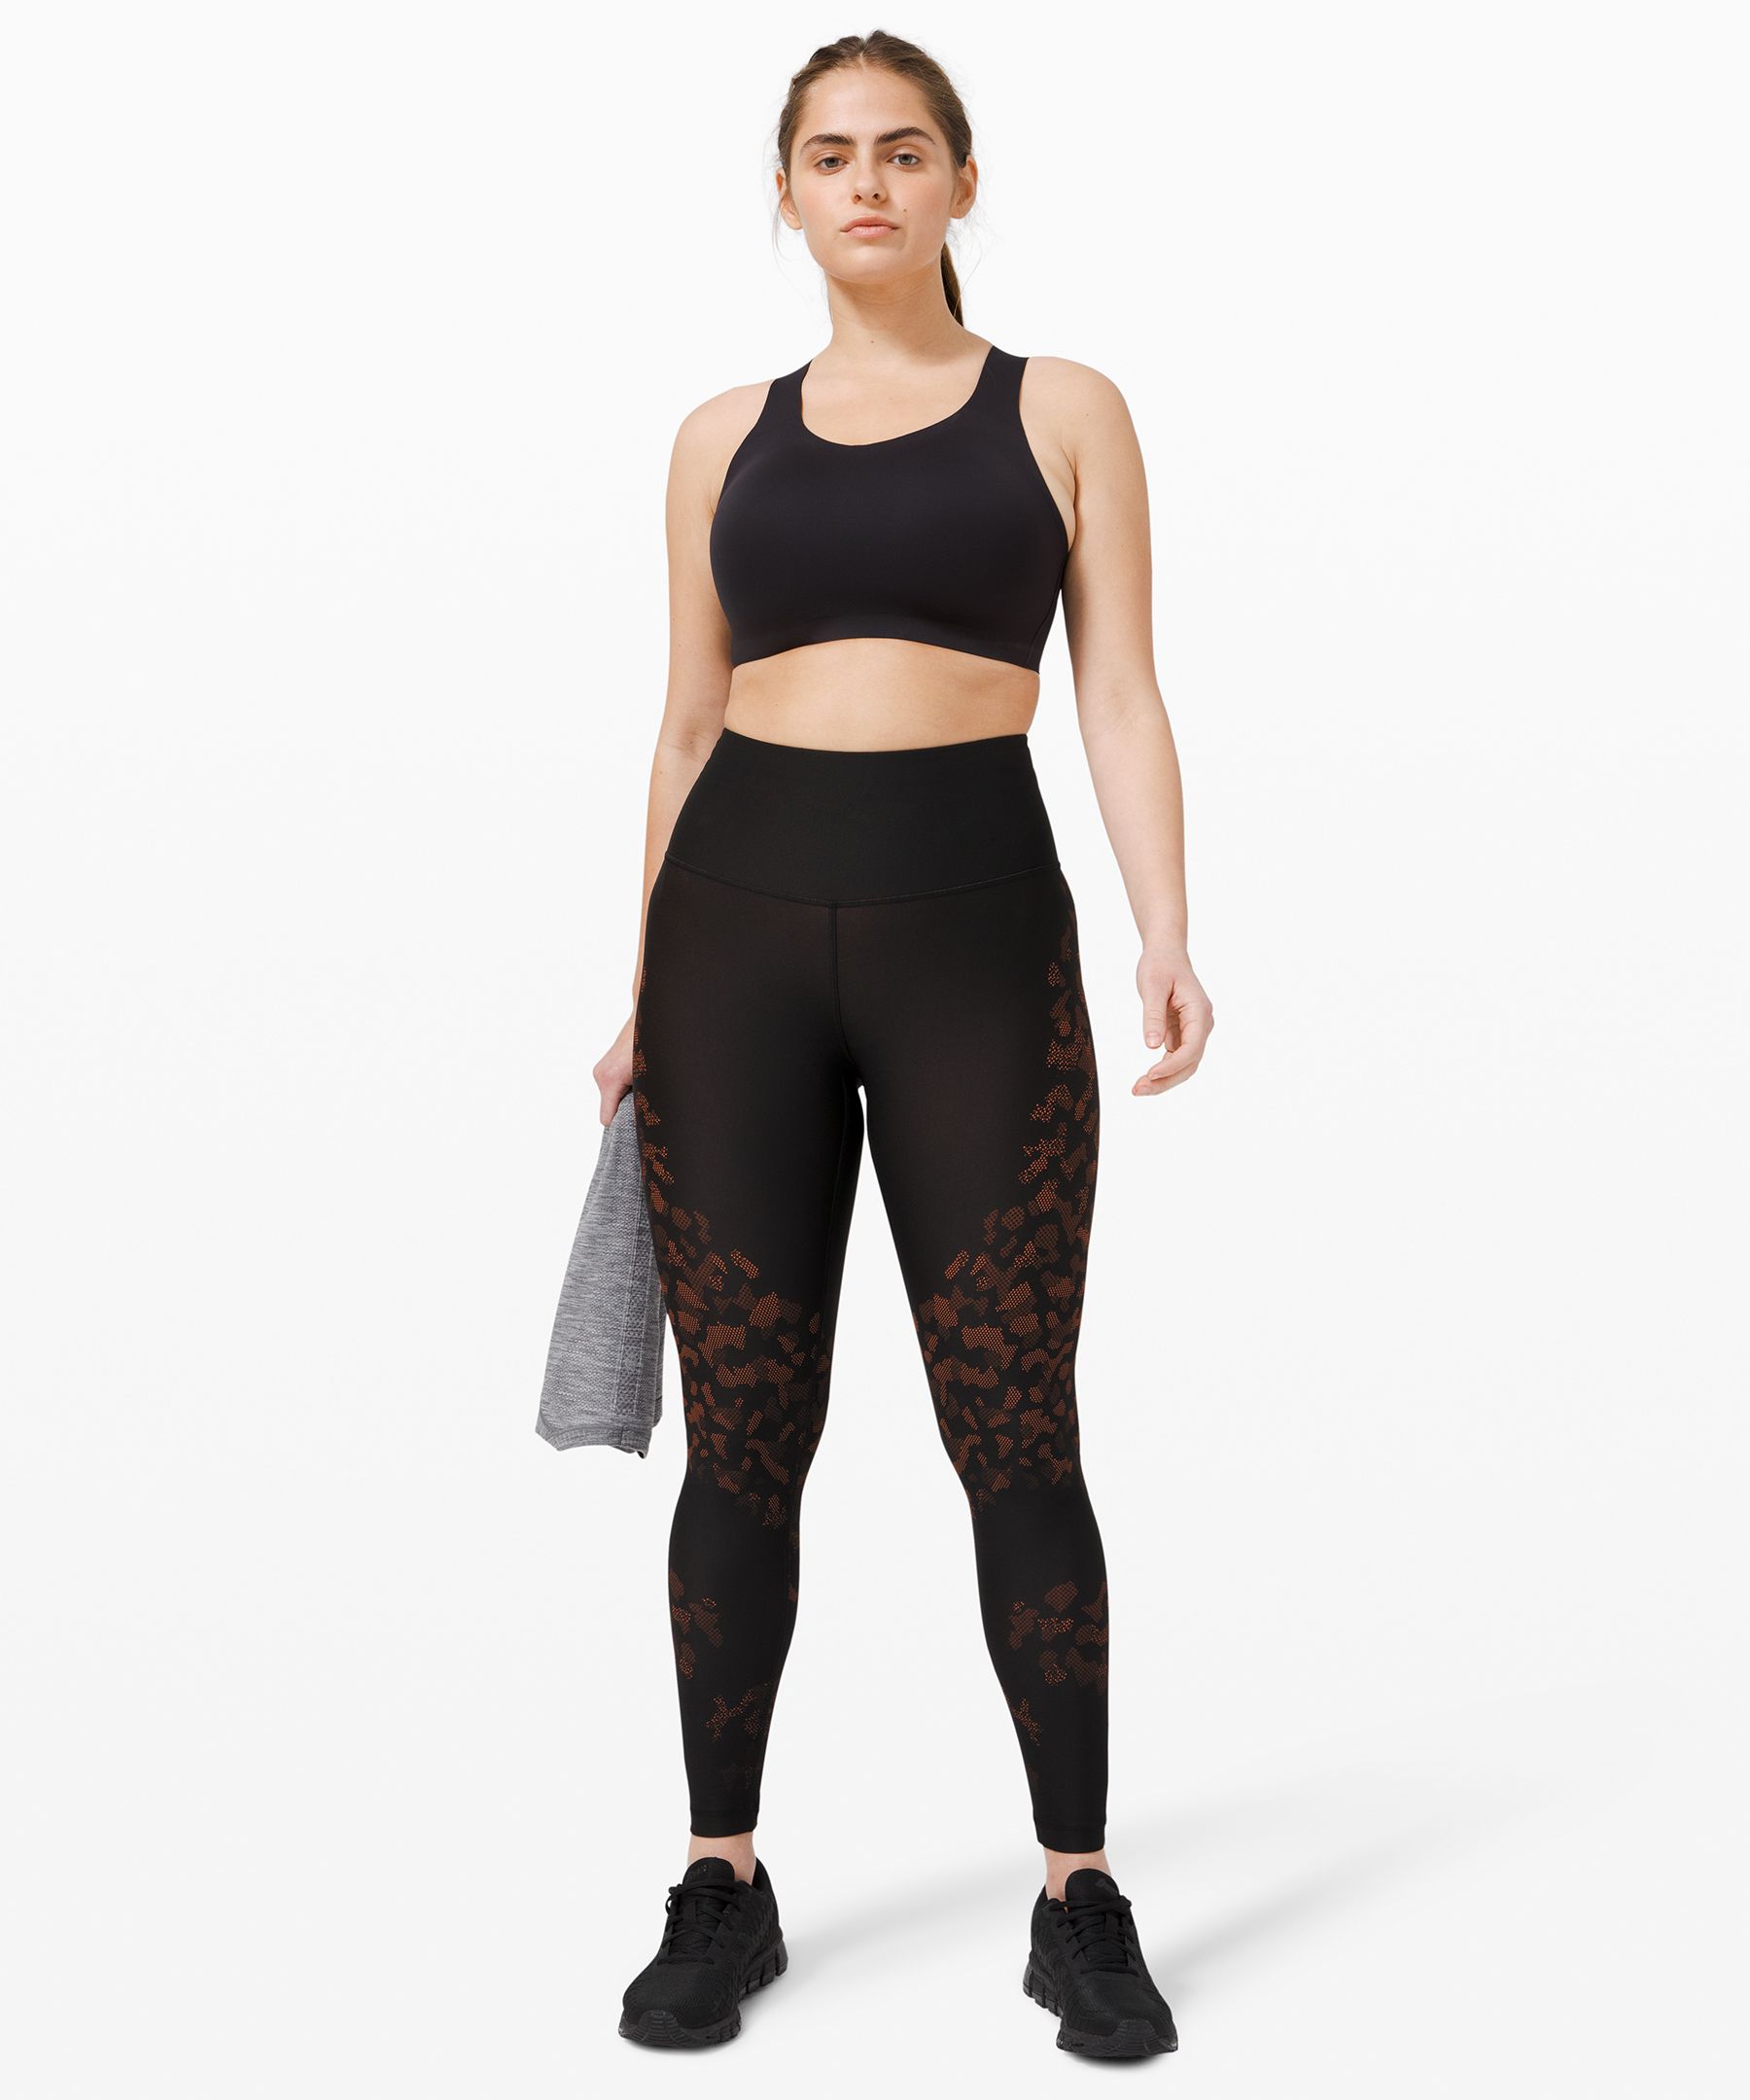 Lululemon Mapped Out HR-Hi-Rise Tight 28” (US6 - UK10 ) RRP £118